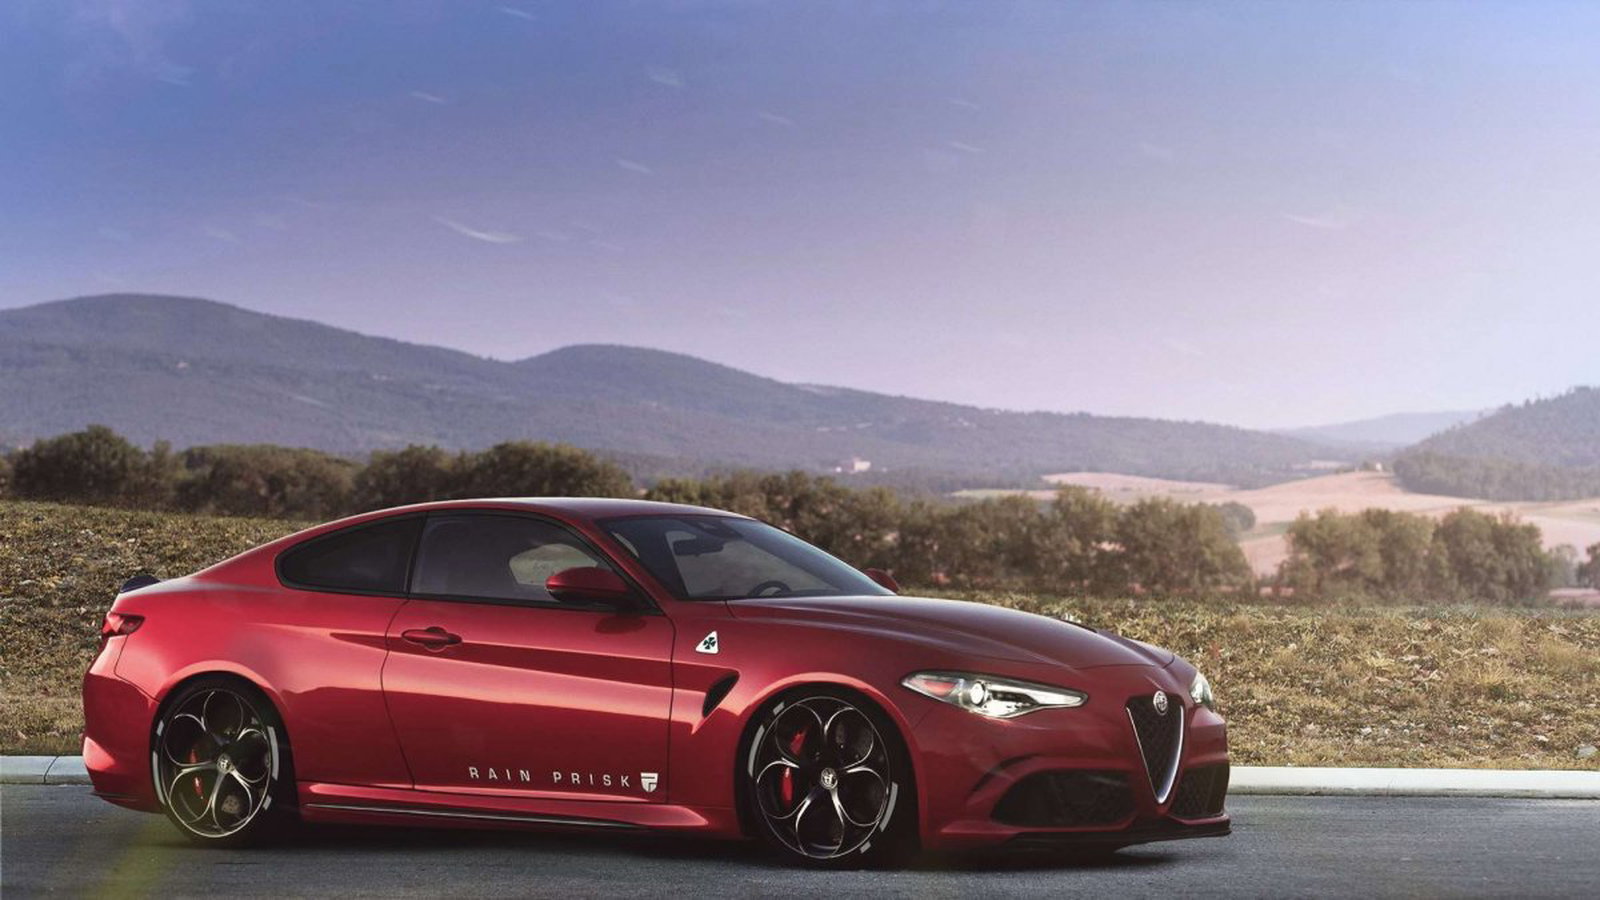 Alfa Romeo Giulia Coupe Coming Next Year To Rival The Bmw 4 Series